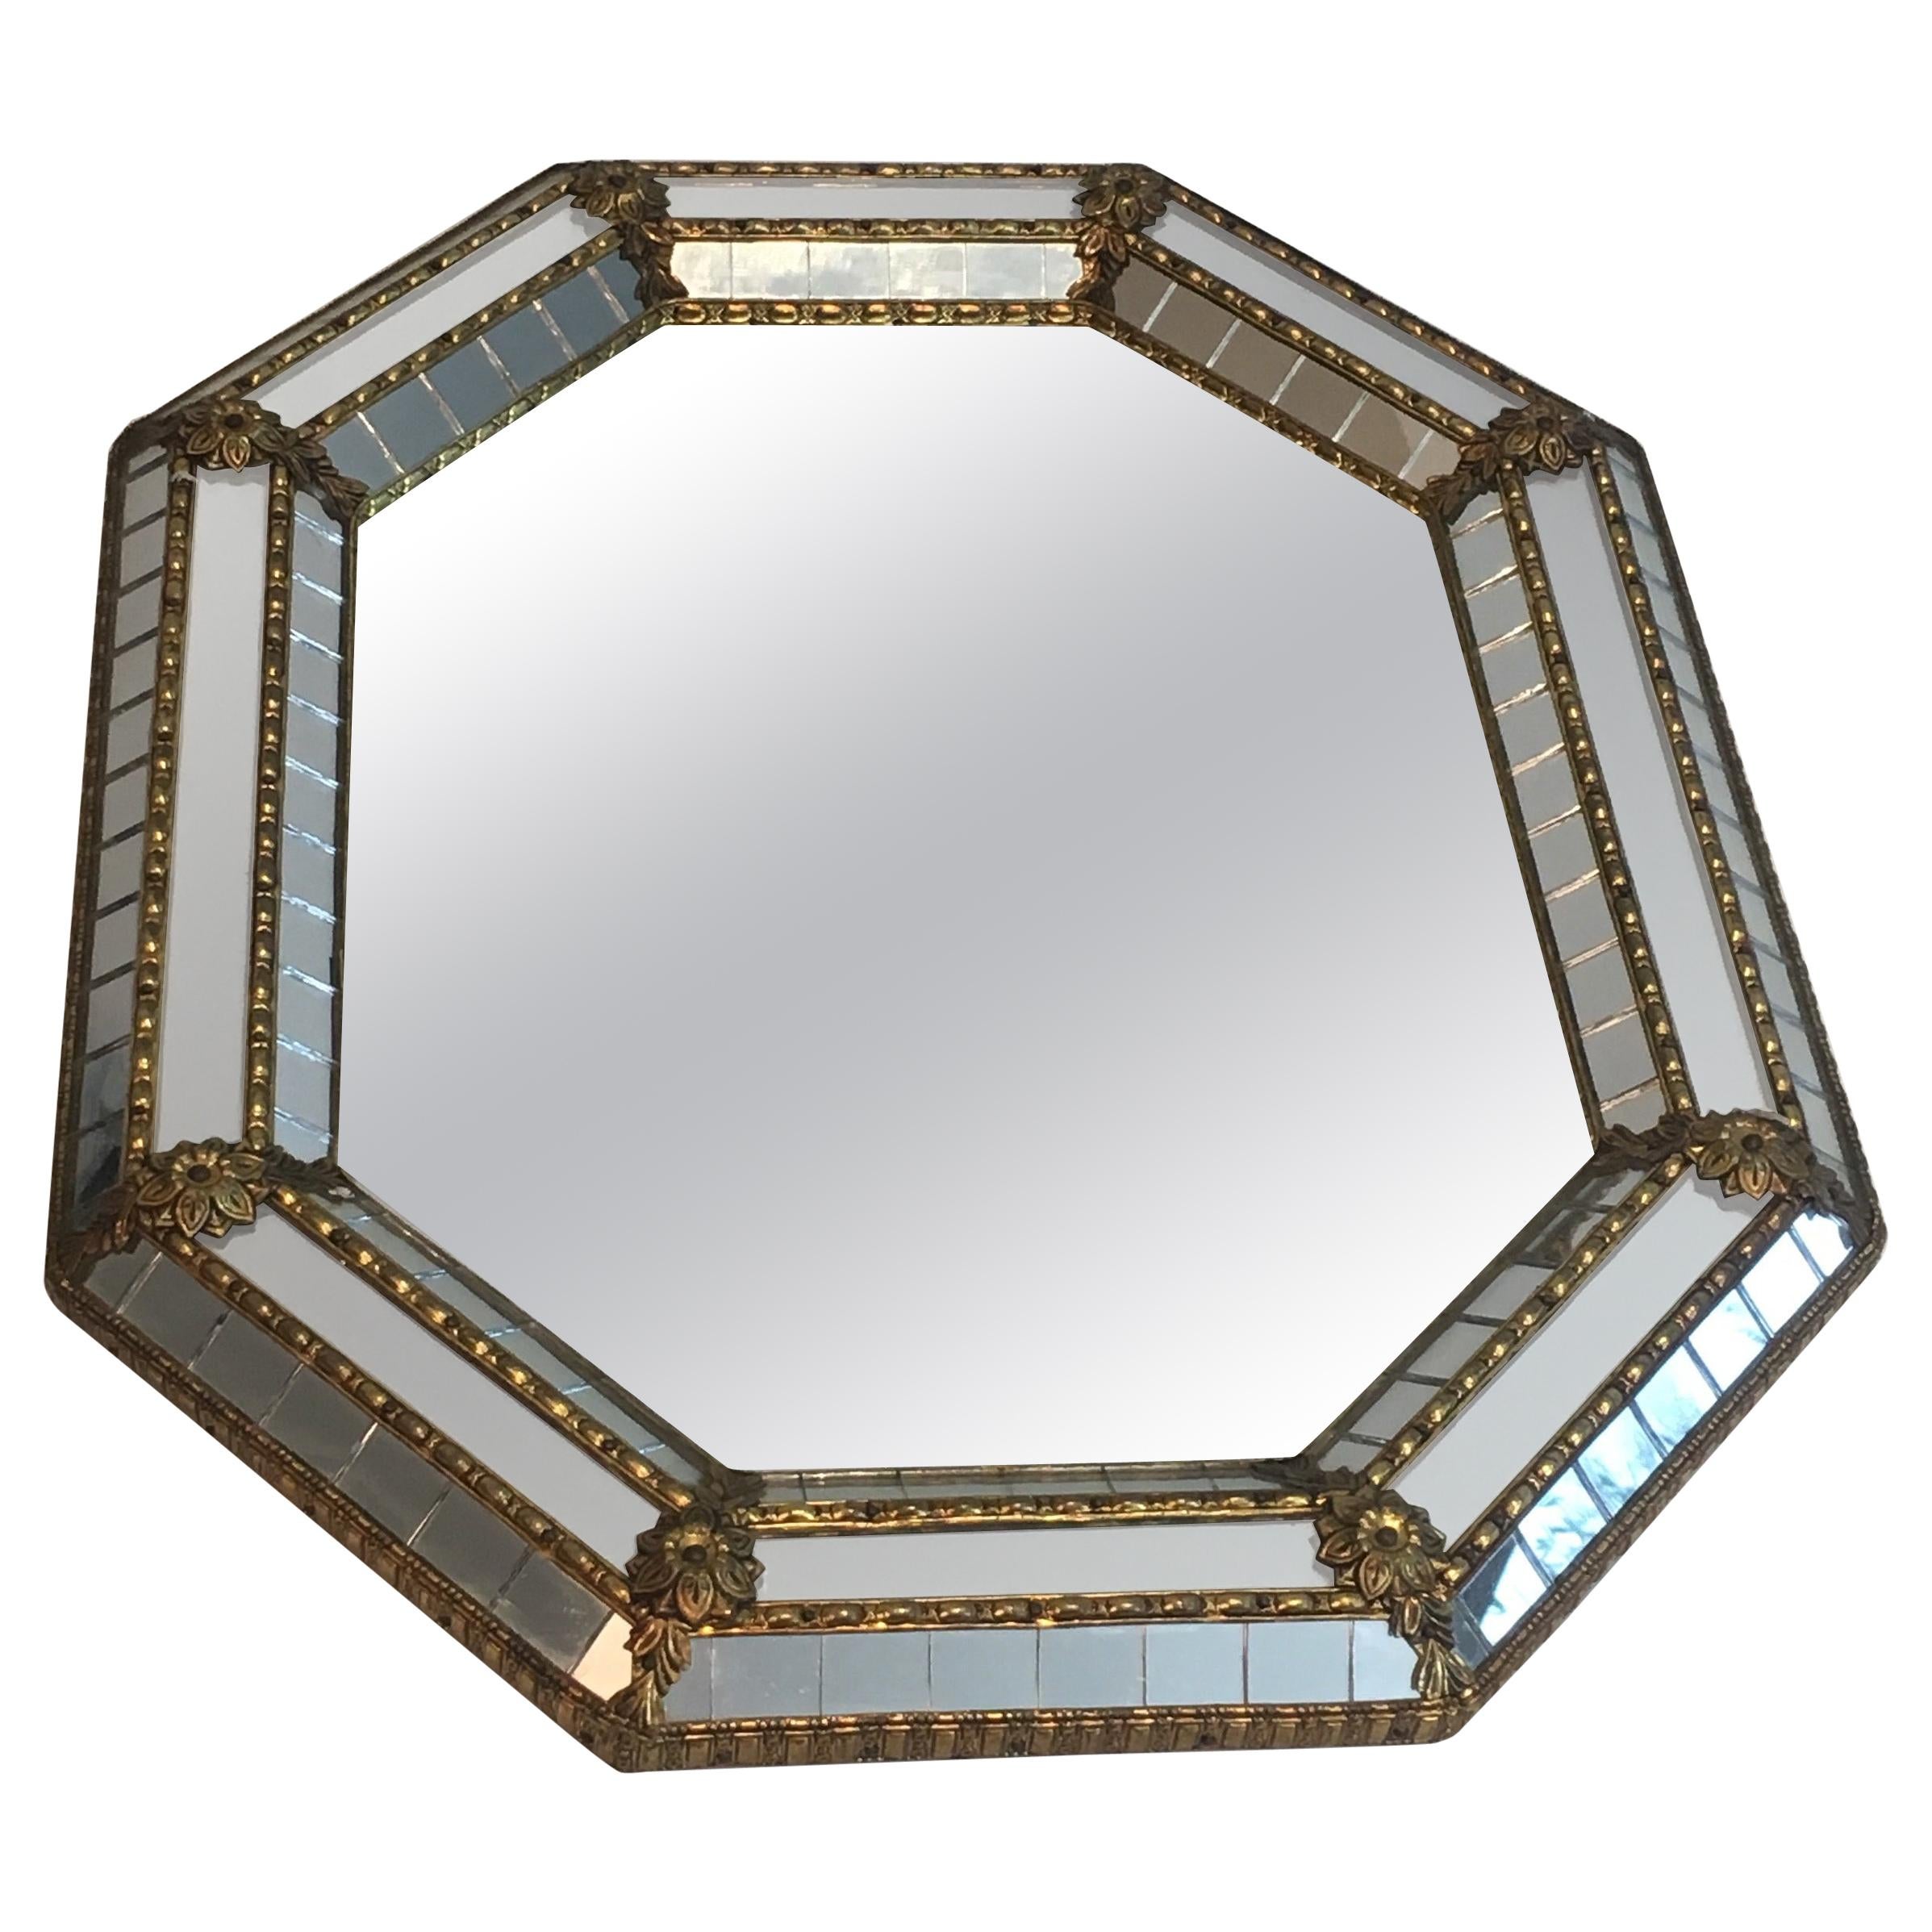 Octogonal Brass Garlands and Flowers Mirror Faceted with Small Mirrors